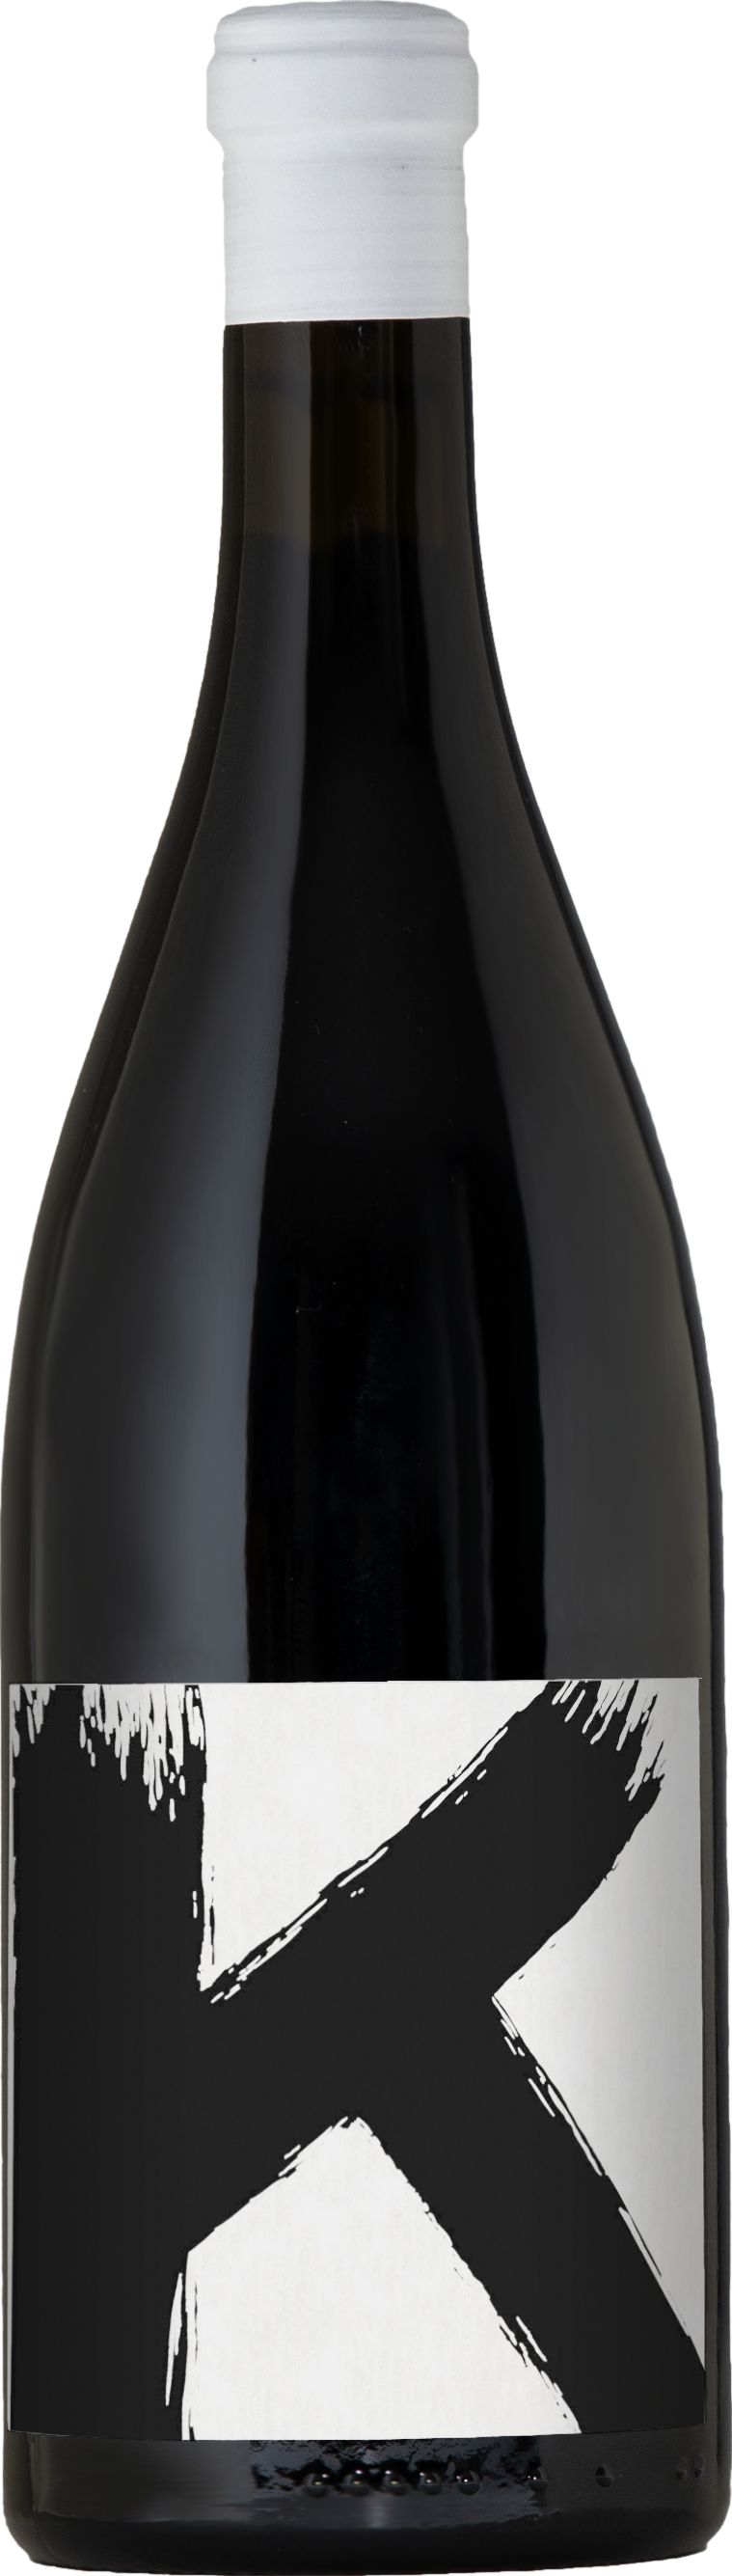 Charles Smith K Vintners The Hidden Syrah 2018 Charles Smith 8wines DACH